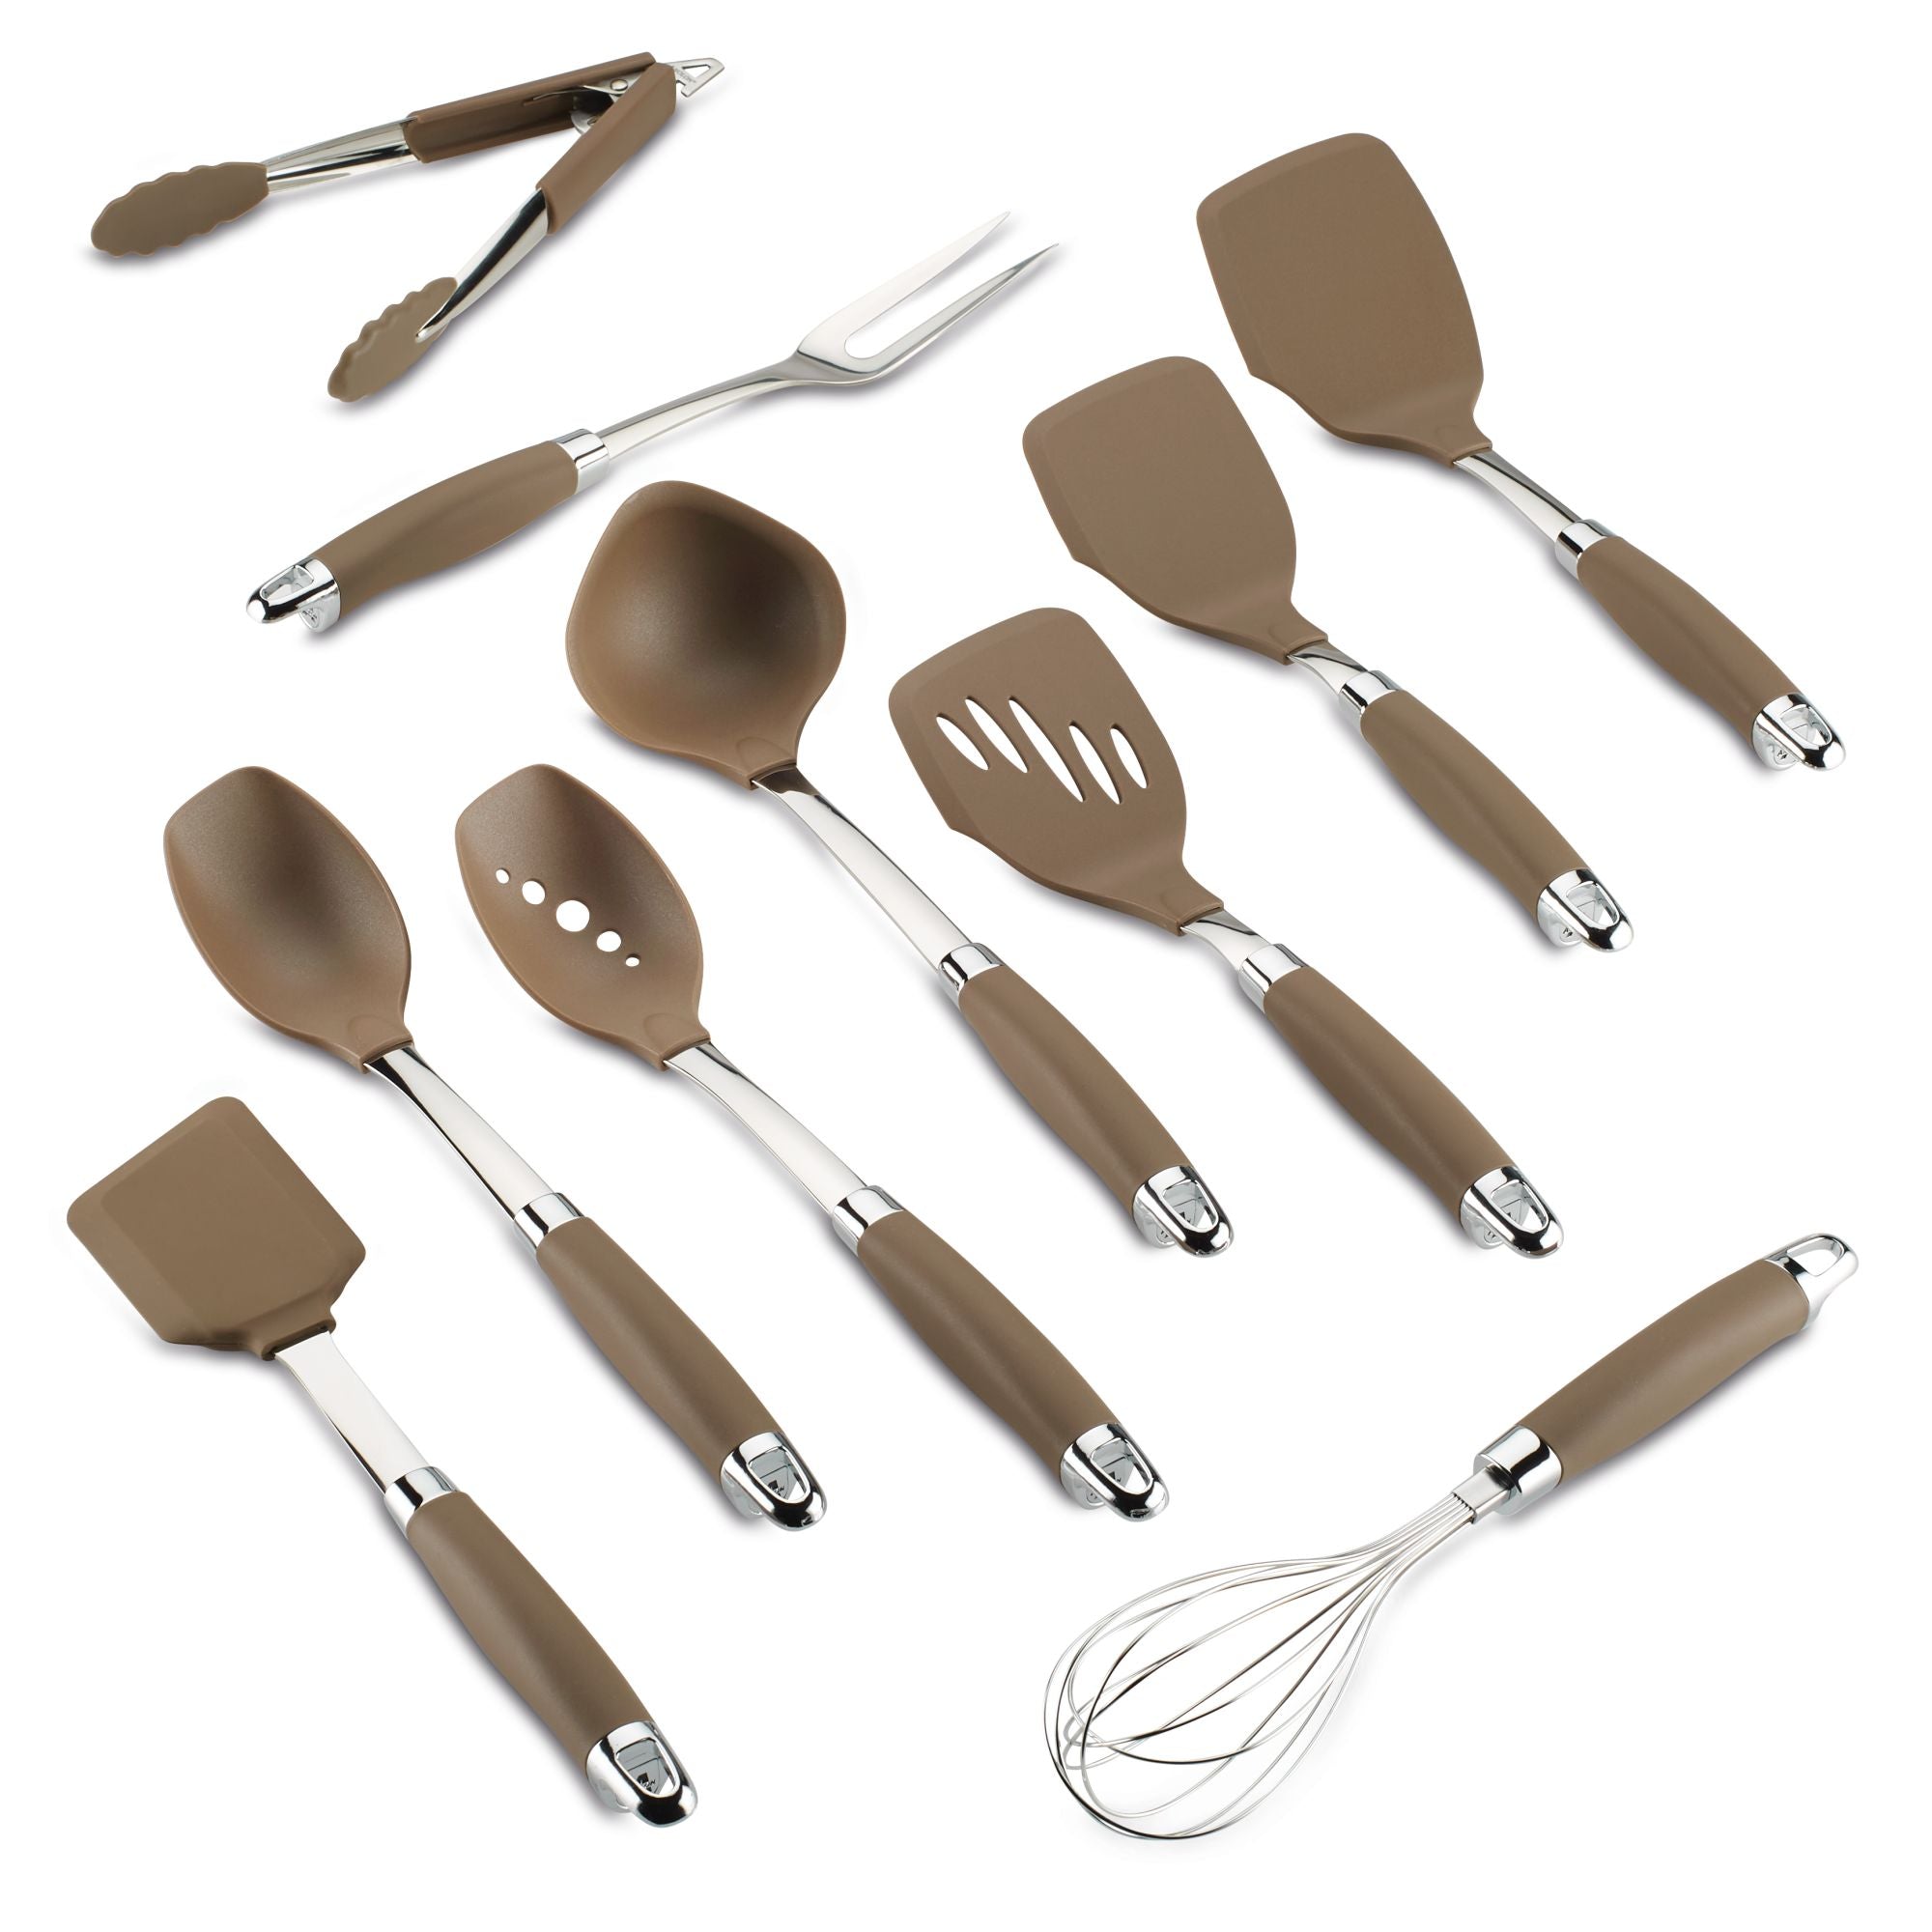 Wooden Kitchen Utensils Set - 6-Piece Non-Toxic Non-Stick Durable Cooking  Tools for Every Home Chef